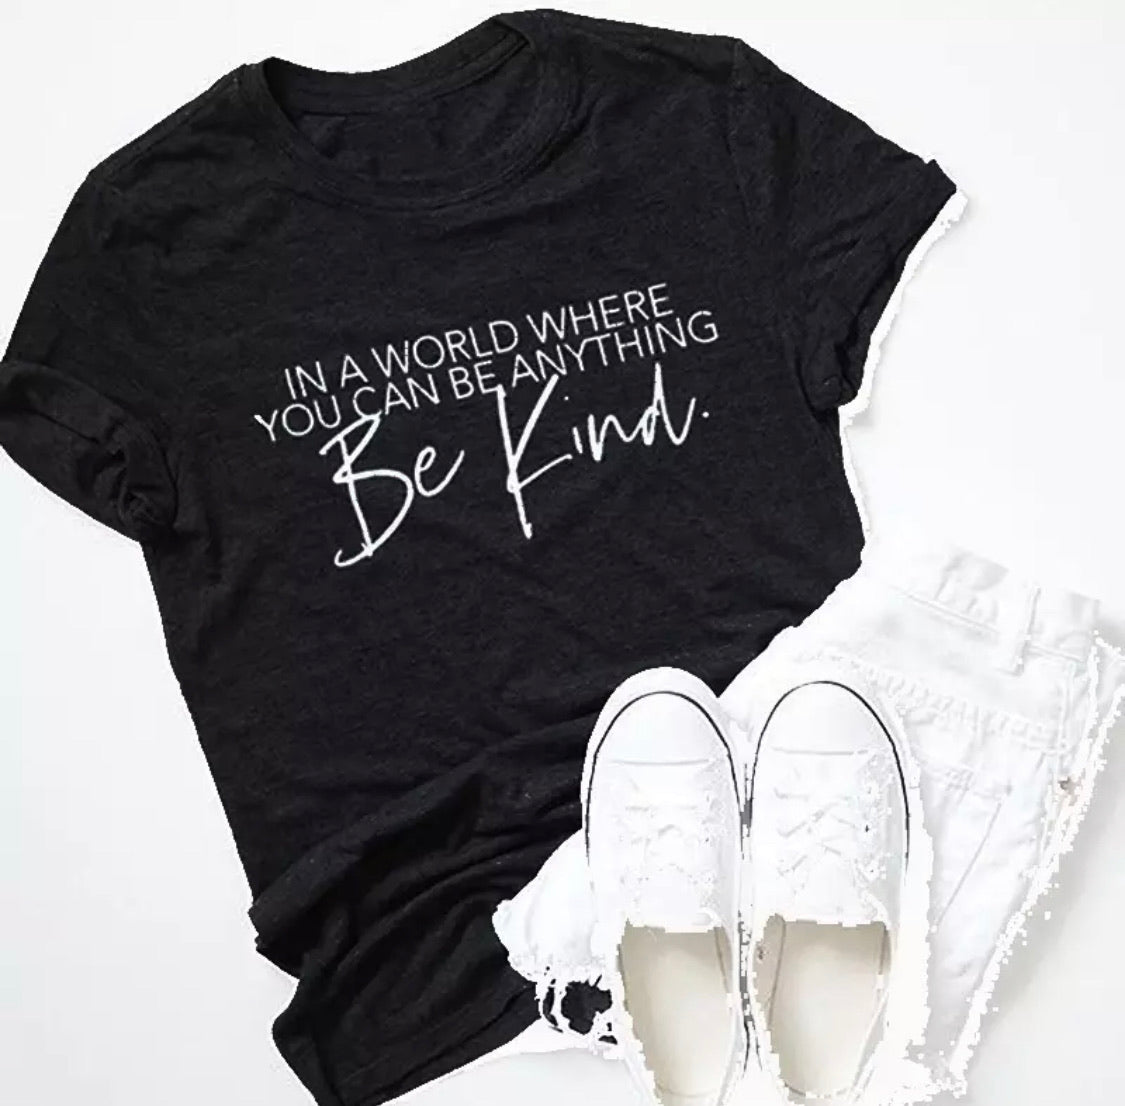 In A World Where You Can Be Anything Be Kind - T-Shirt